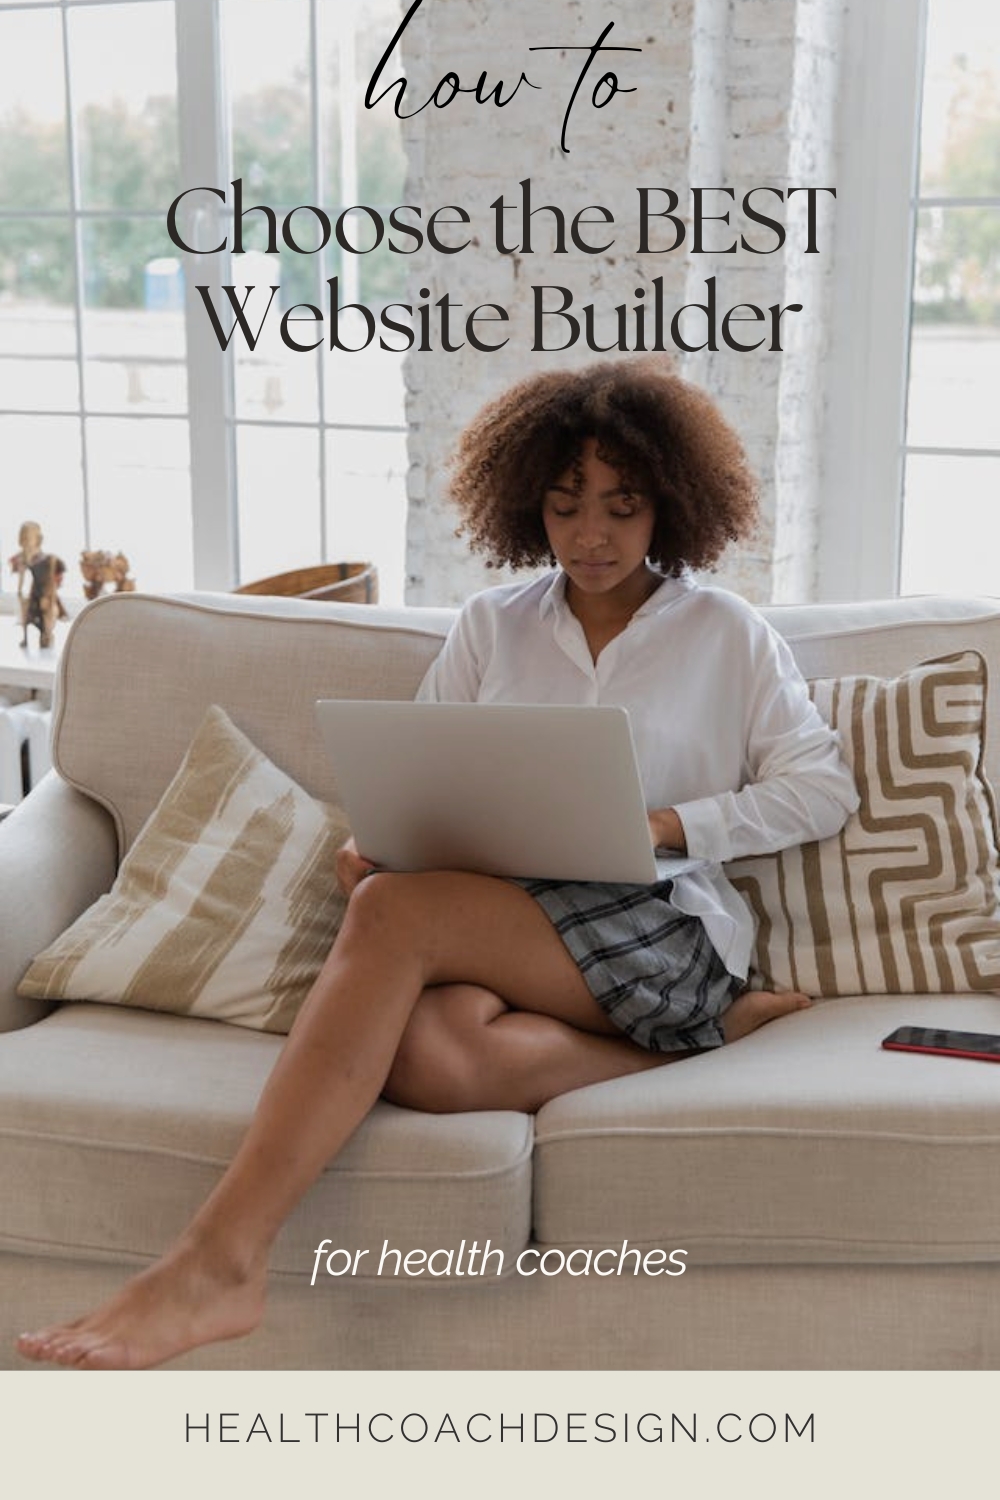 Pinterest pin for blog post titled "8 Simple Steps to Choose the Best Website Builder for Health Coaches." Woman in photo is sitting on a sofa, with a laptop on her lap, looking at the laptop screen and typing. 